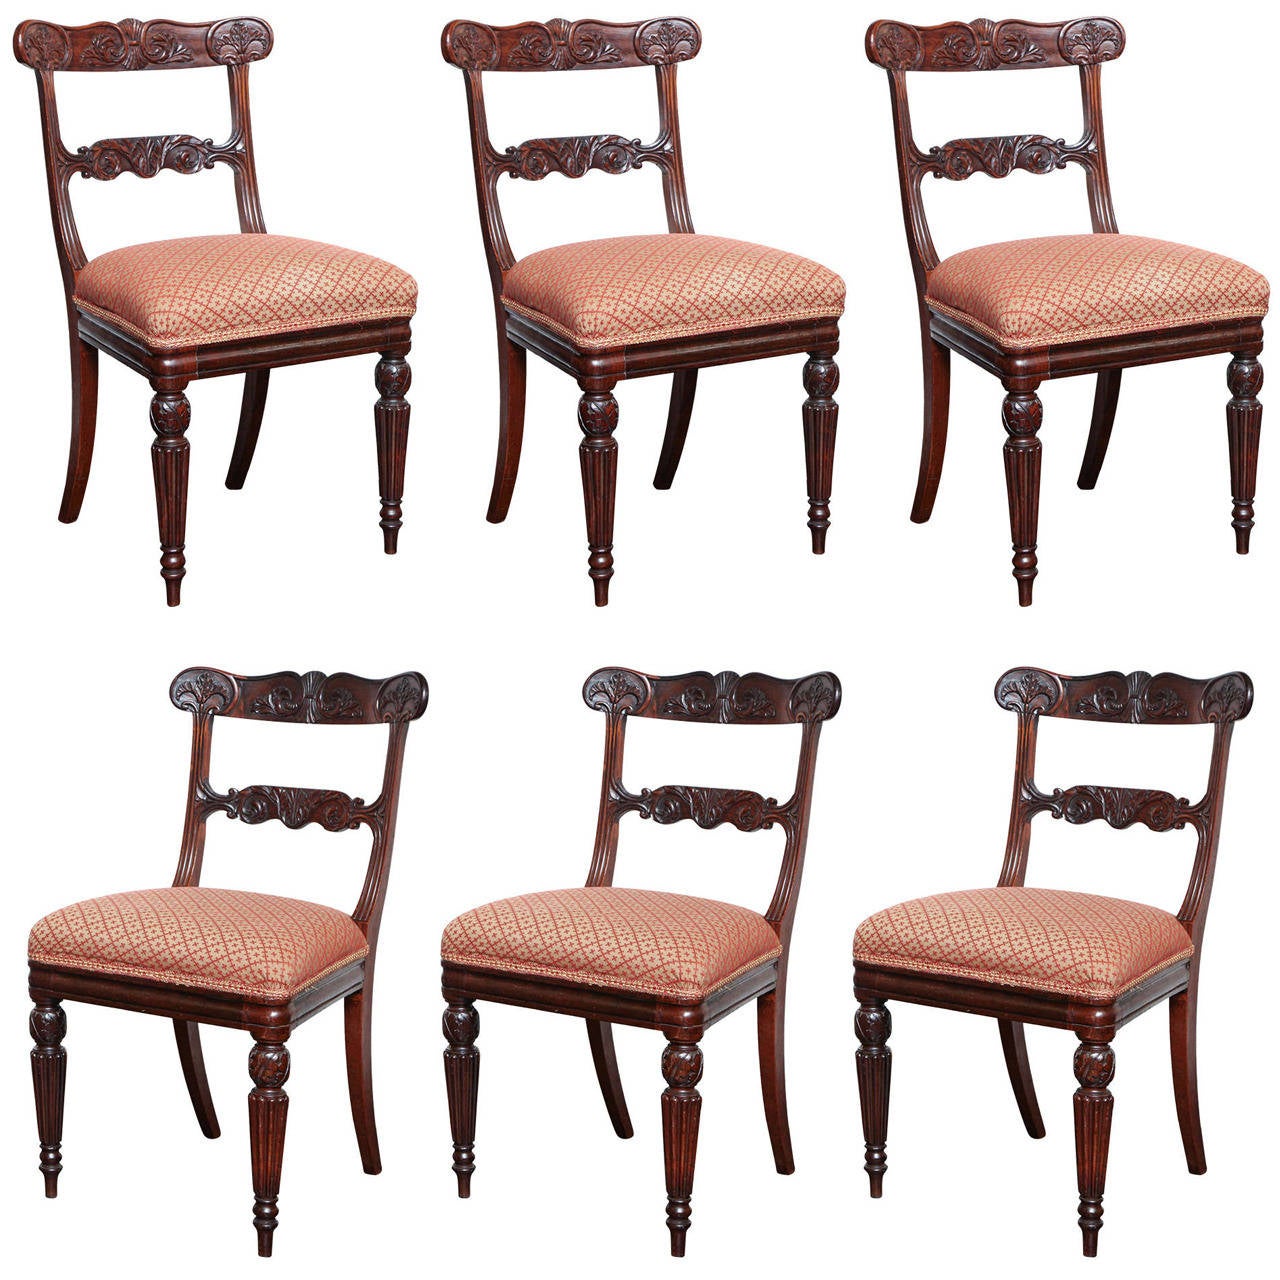 Set of Six Early 19th Century English Regency Side Chairs